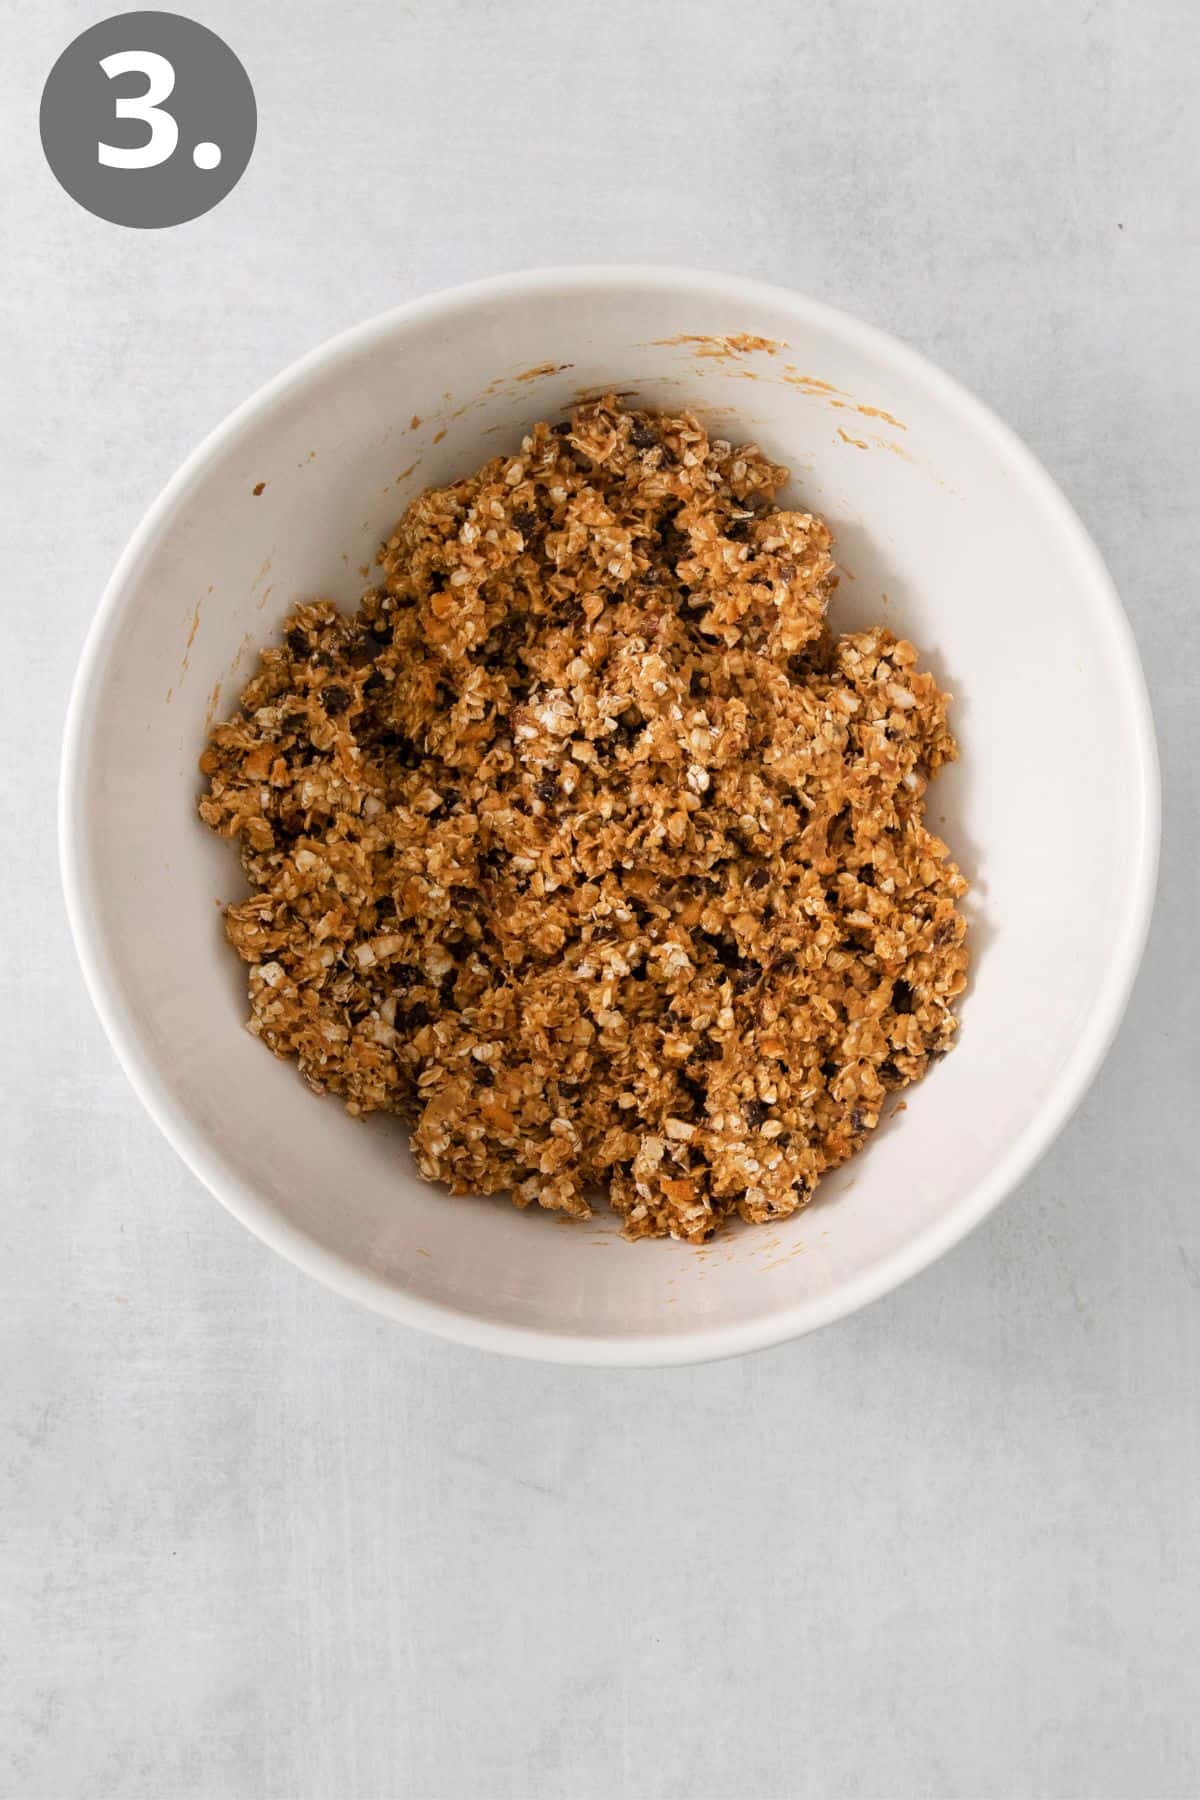 Oatmeal bar ingredients mixed together in a bowl